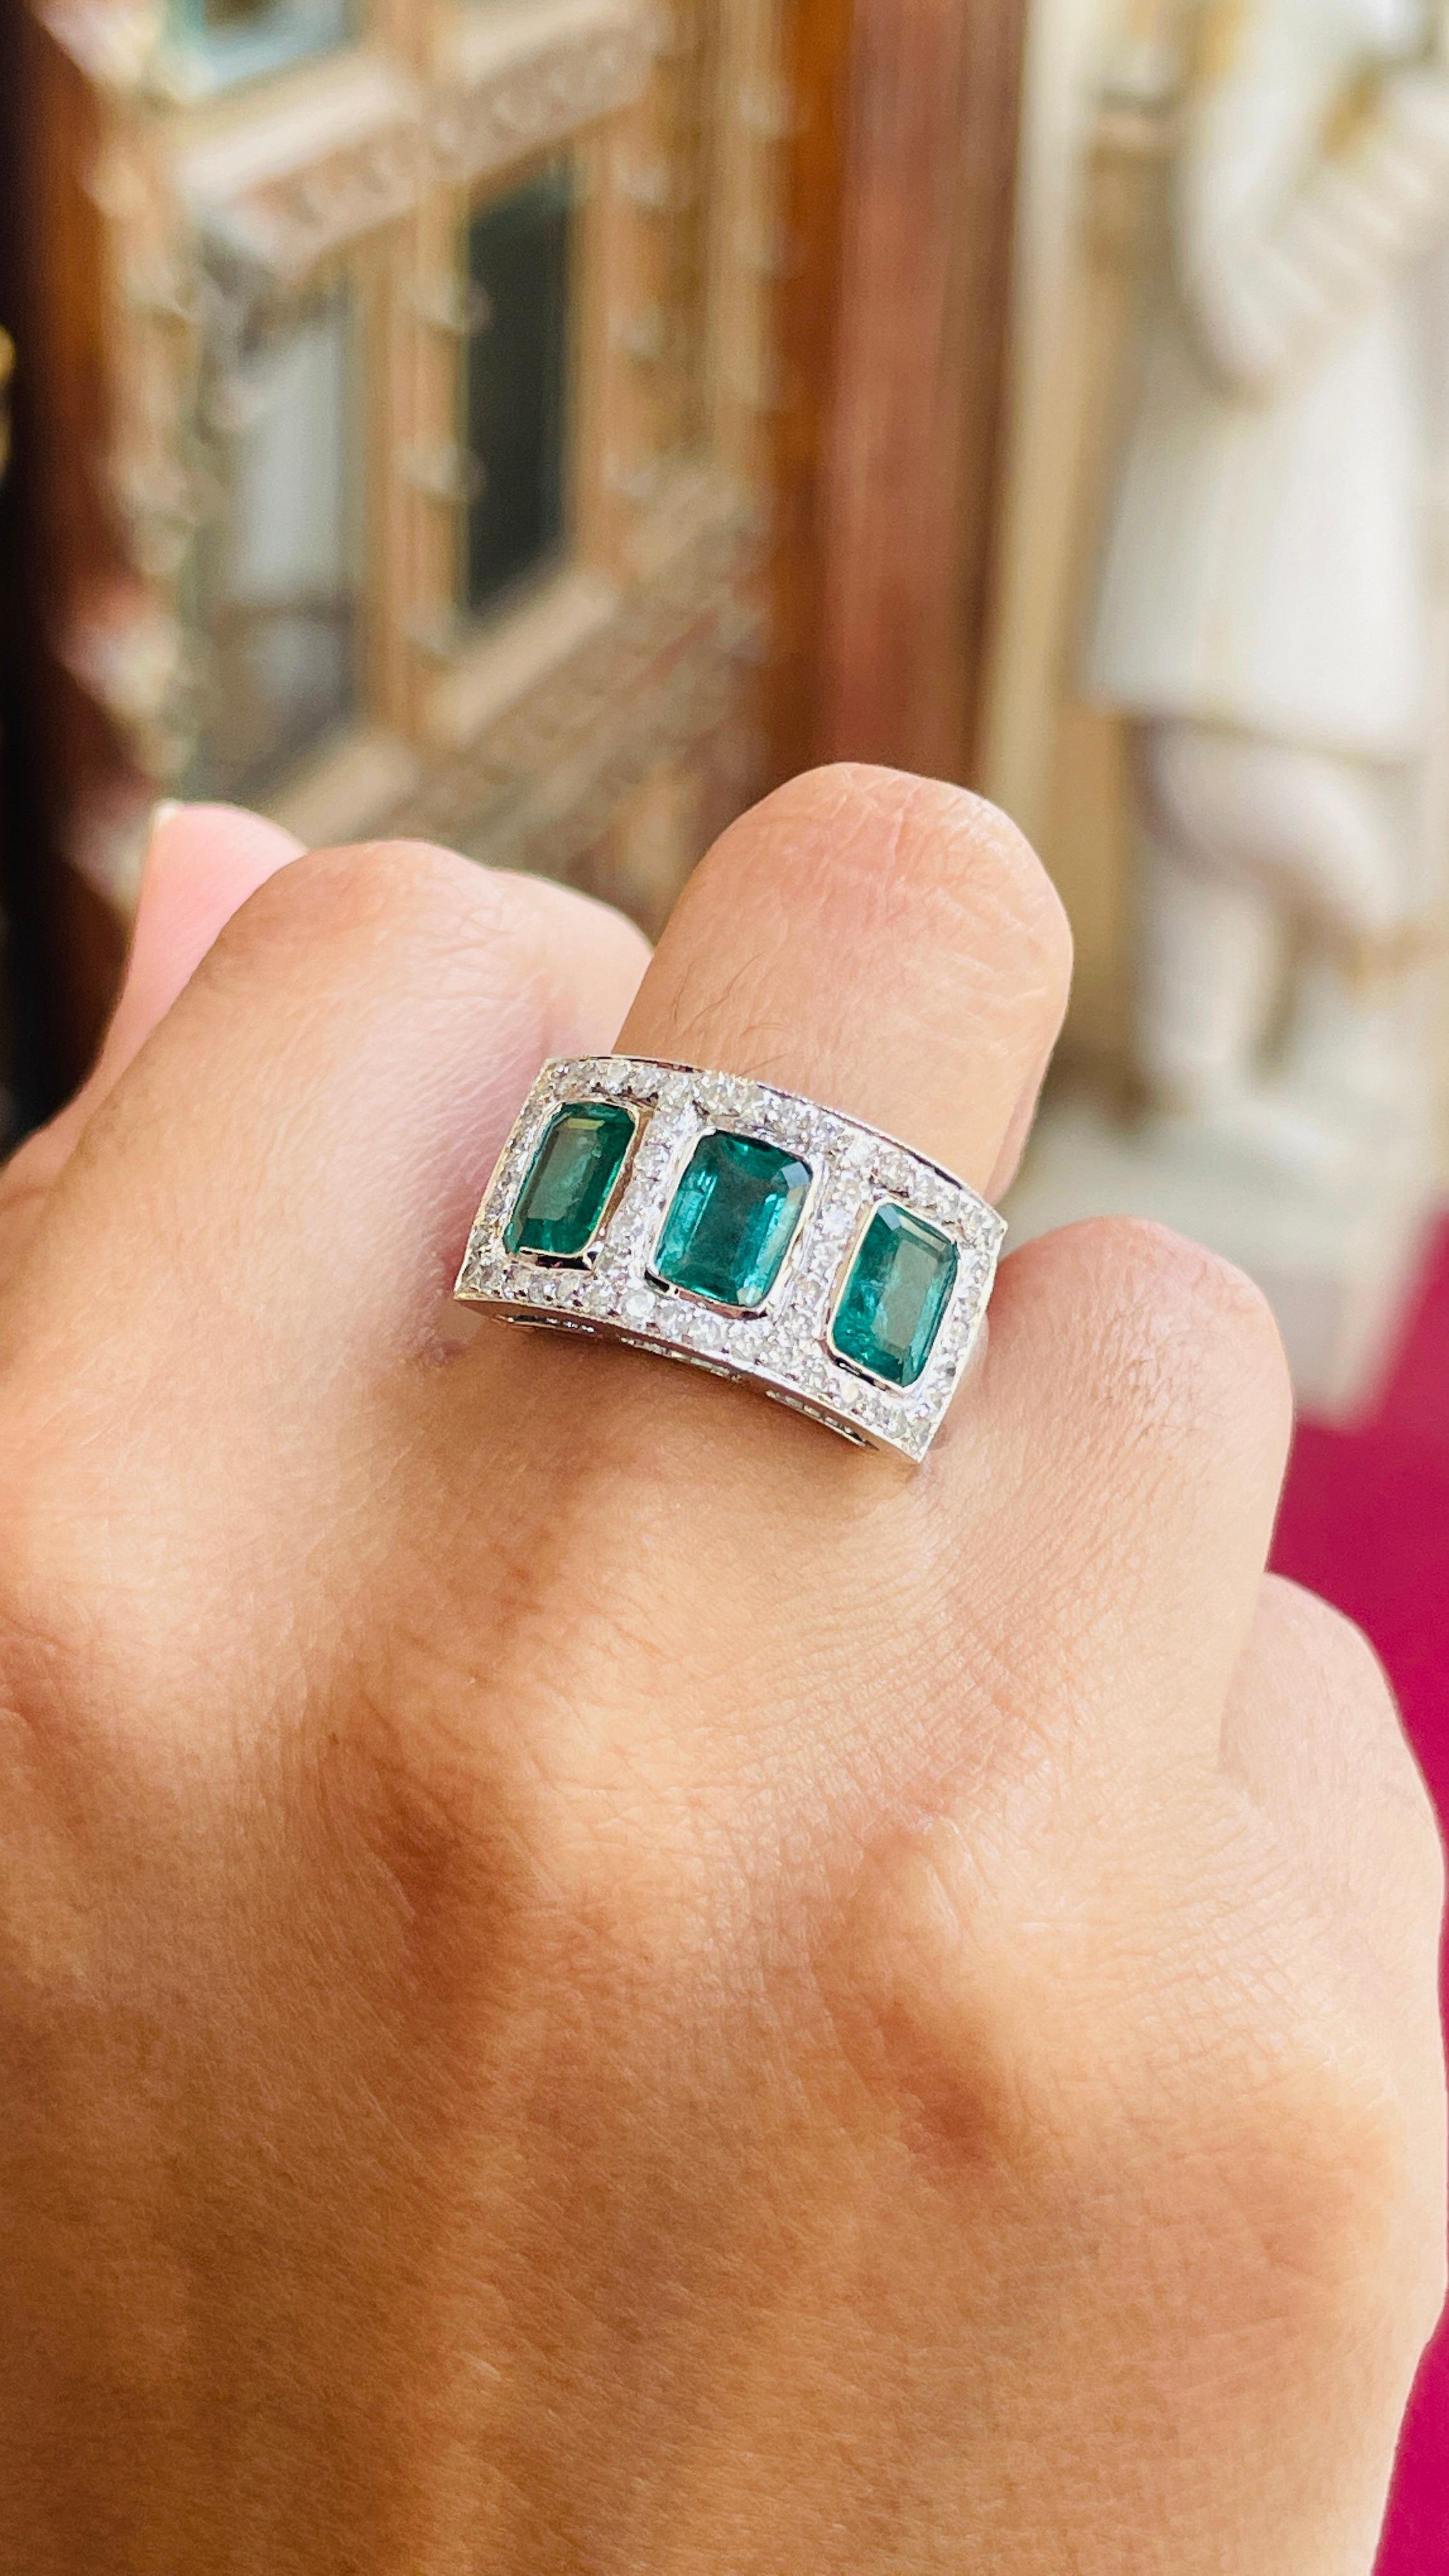 For Sale:  Three Stone Emerald Ring With Diamond in 18K White Gold 2